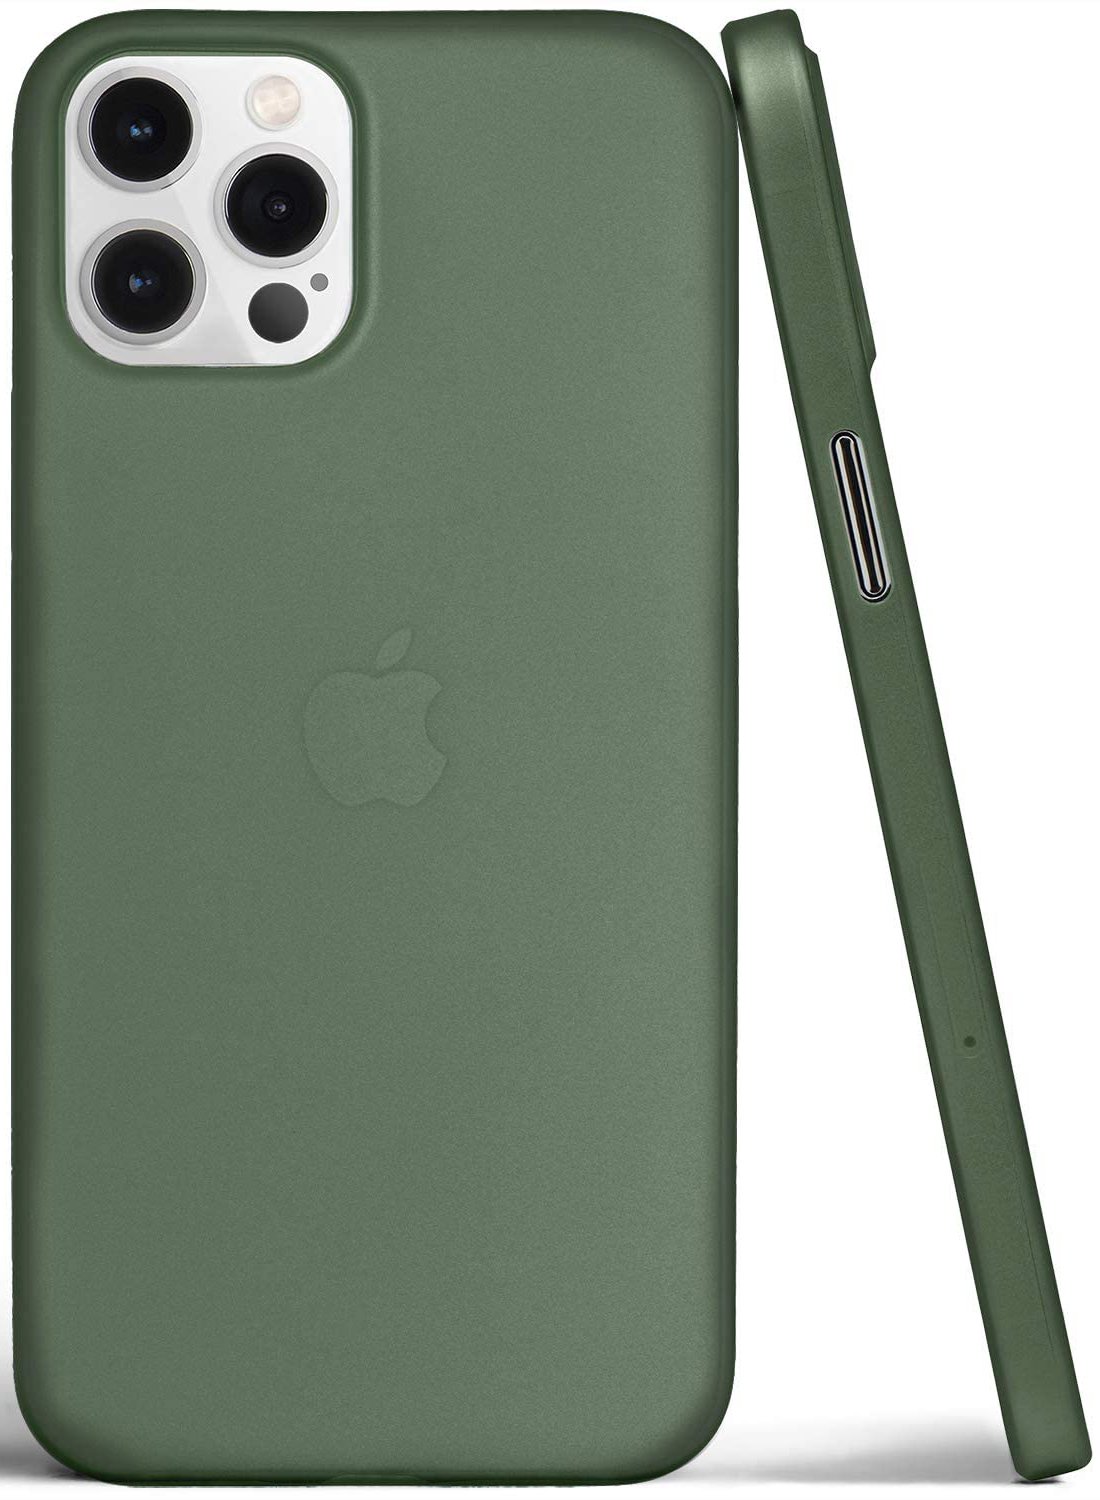 Totallee Thin Iphone 12 Pro Max Case